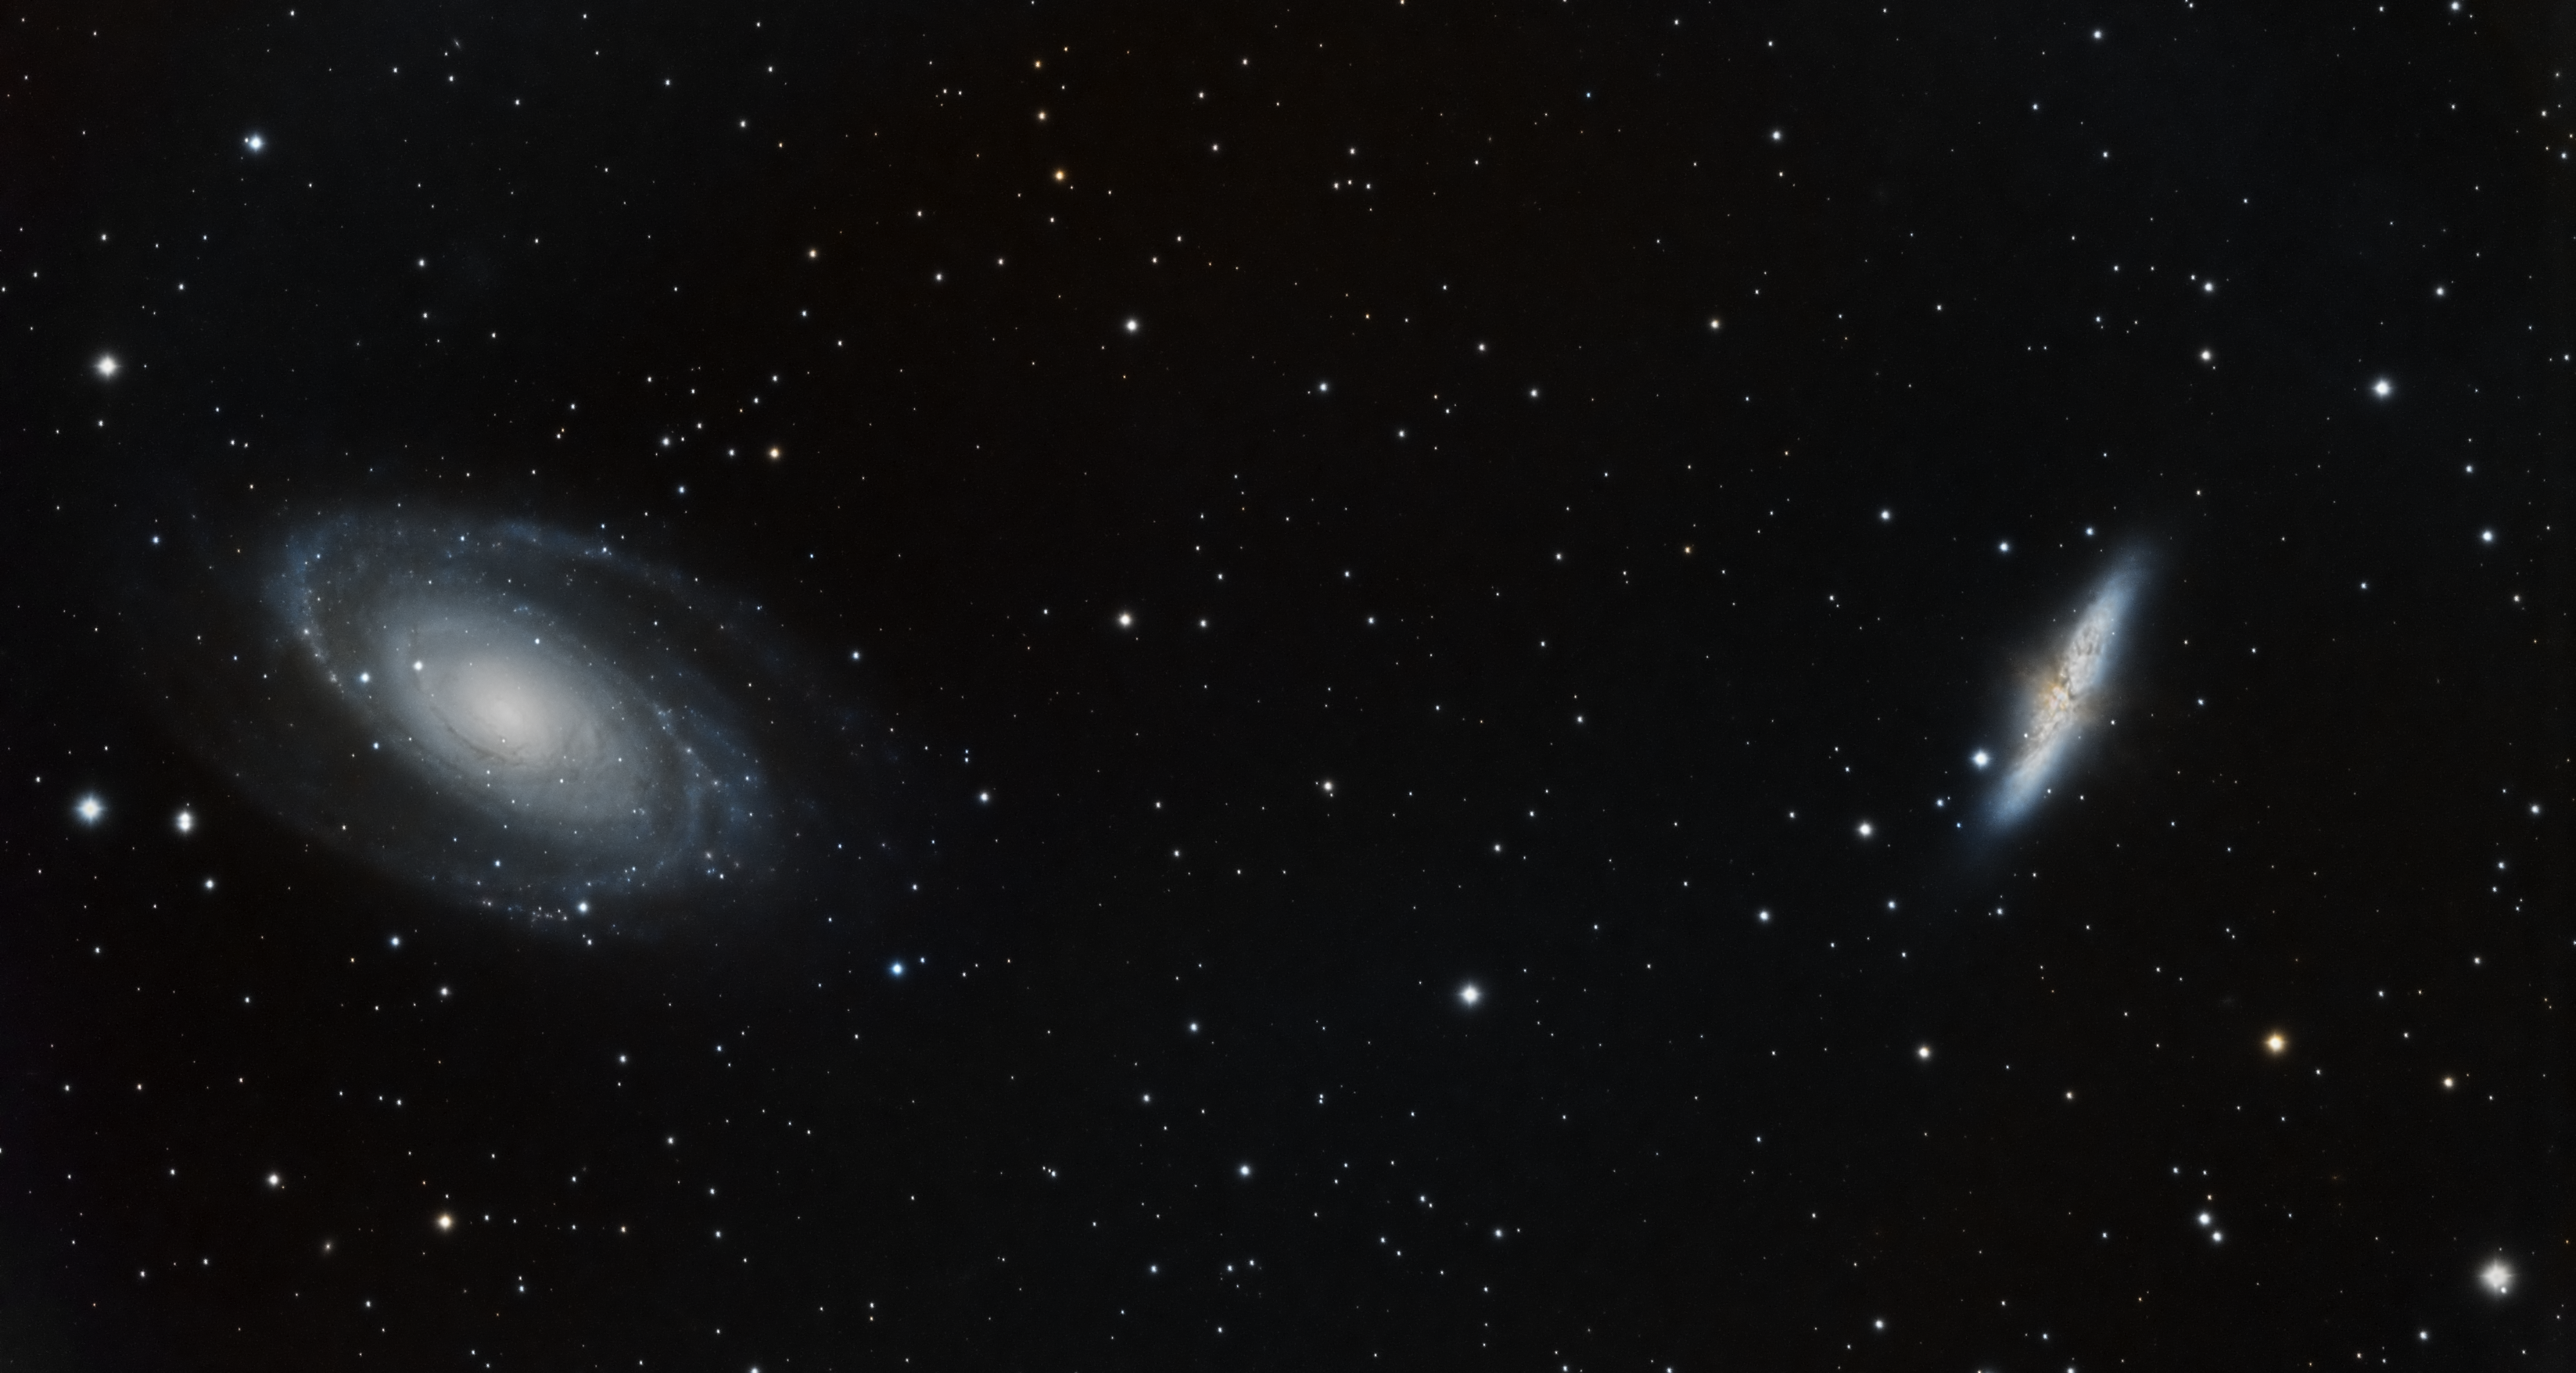 Bode's Galaxies (M81 and M82)